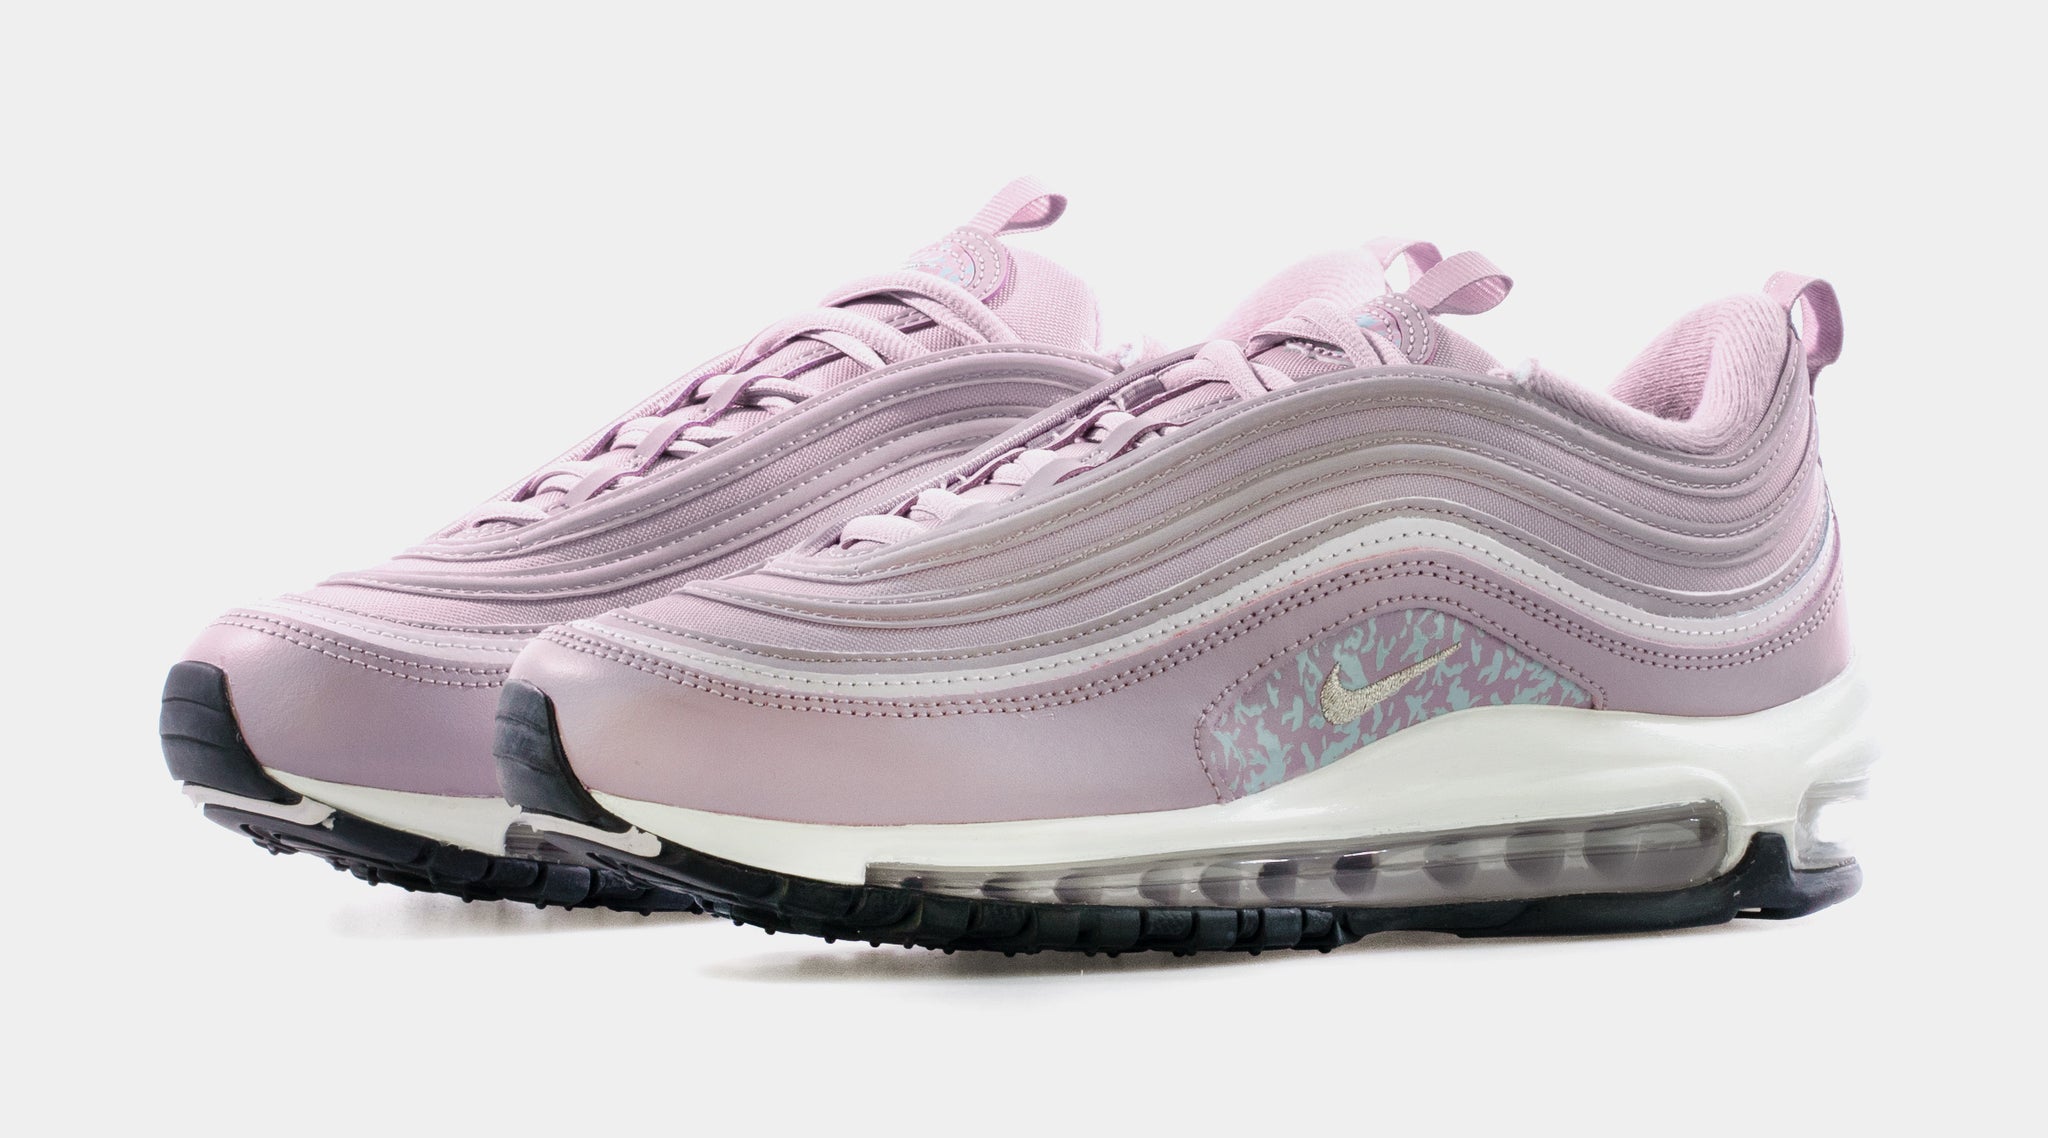 Nike Max 97 Plum Fog Womens Lifestyle Shoes Pink DH0558-500 – Shoe Palace